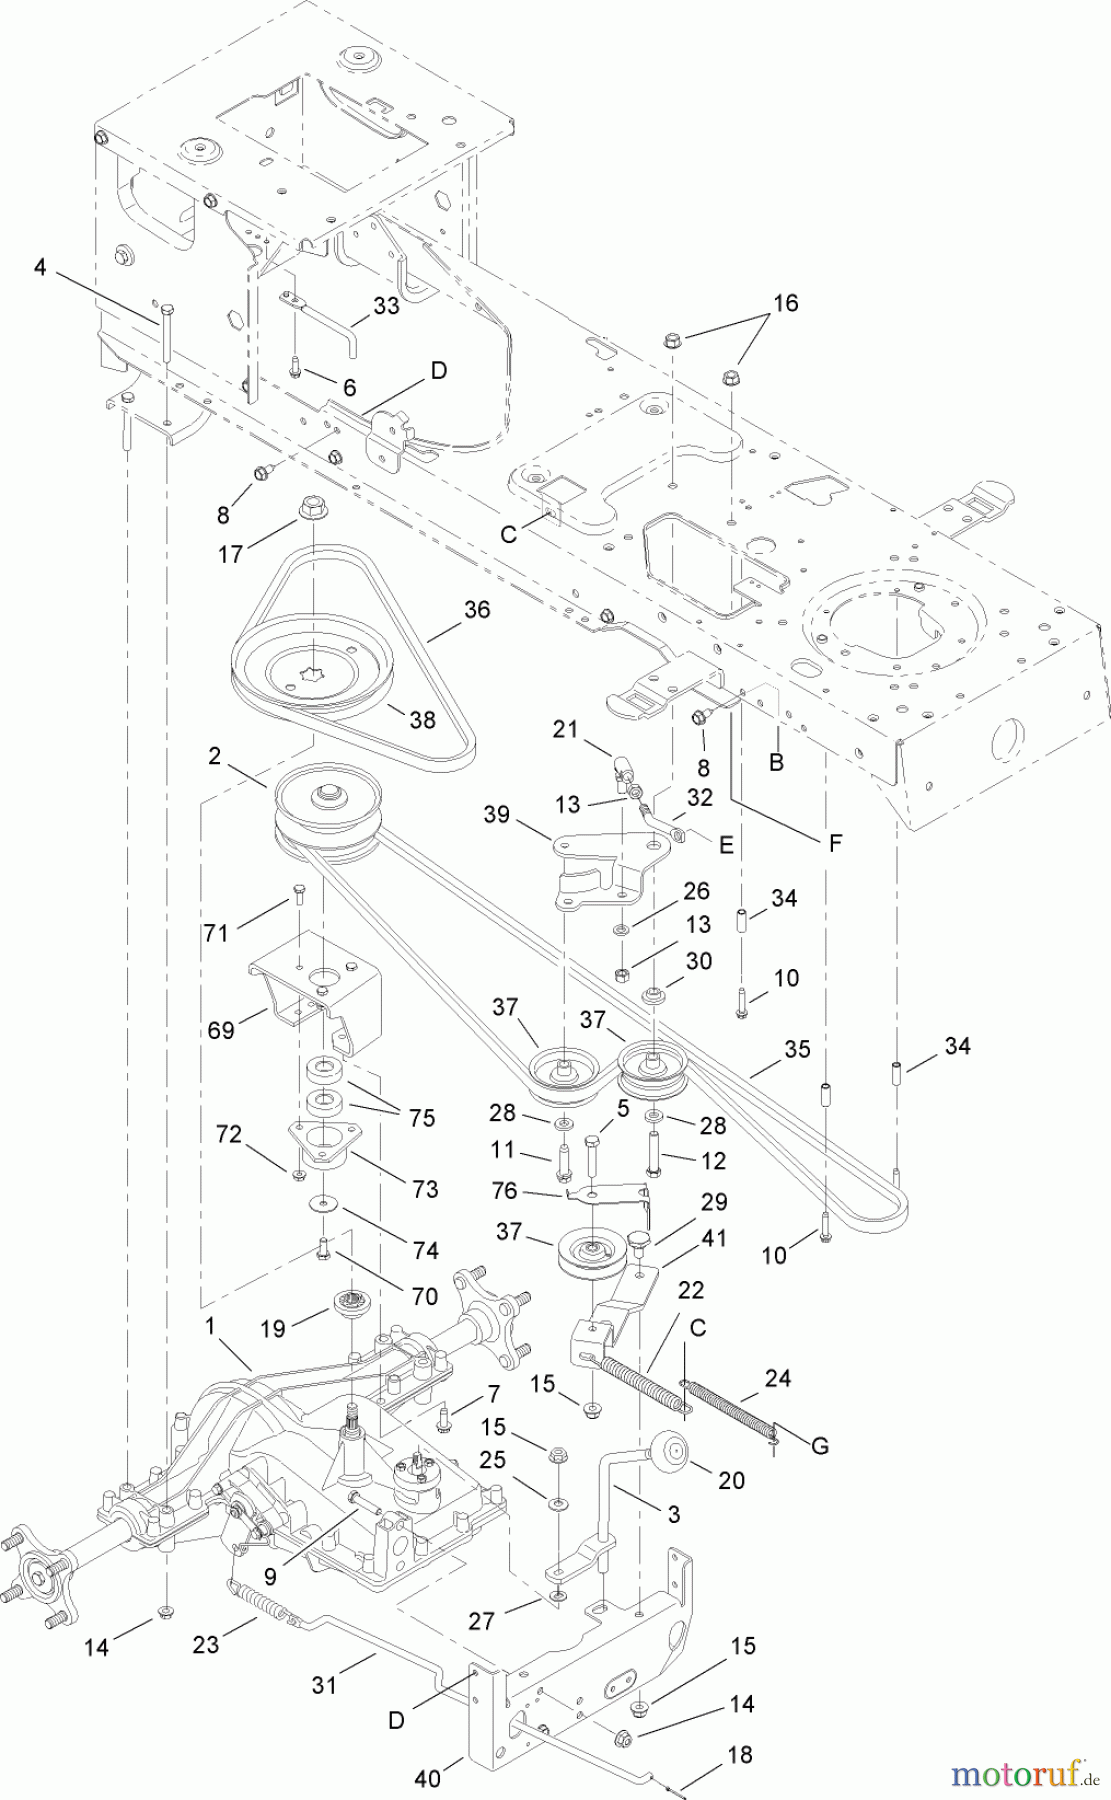  Toro Neu Mowers, Lawn & Garden Tractor Seite 1 14AP80RP744 (GT2100) - Toro GT2100 Garden Tractor, 2006 (1A136H30000-) TRANSMISSION, BELT AND PULLEY ASSEMBLY